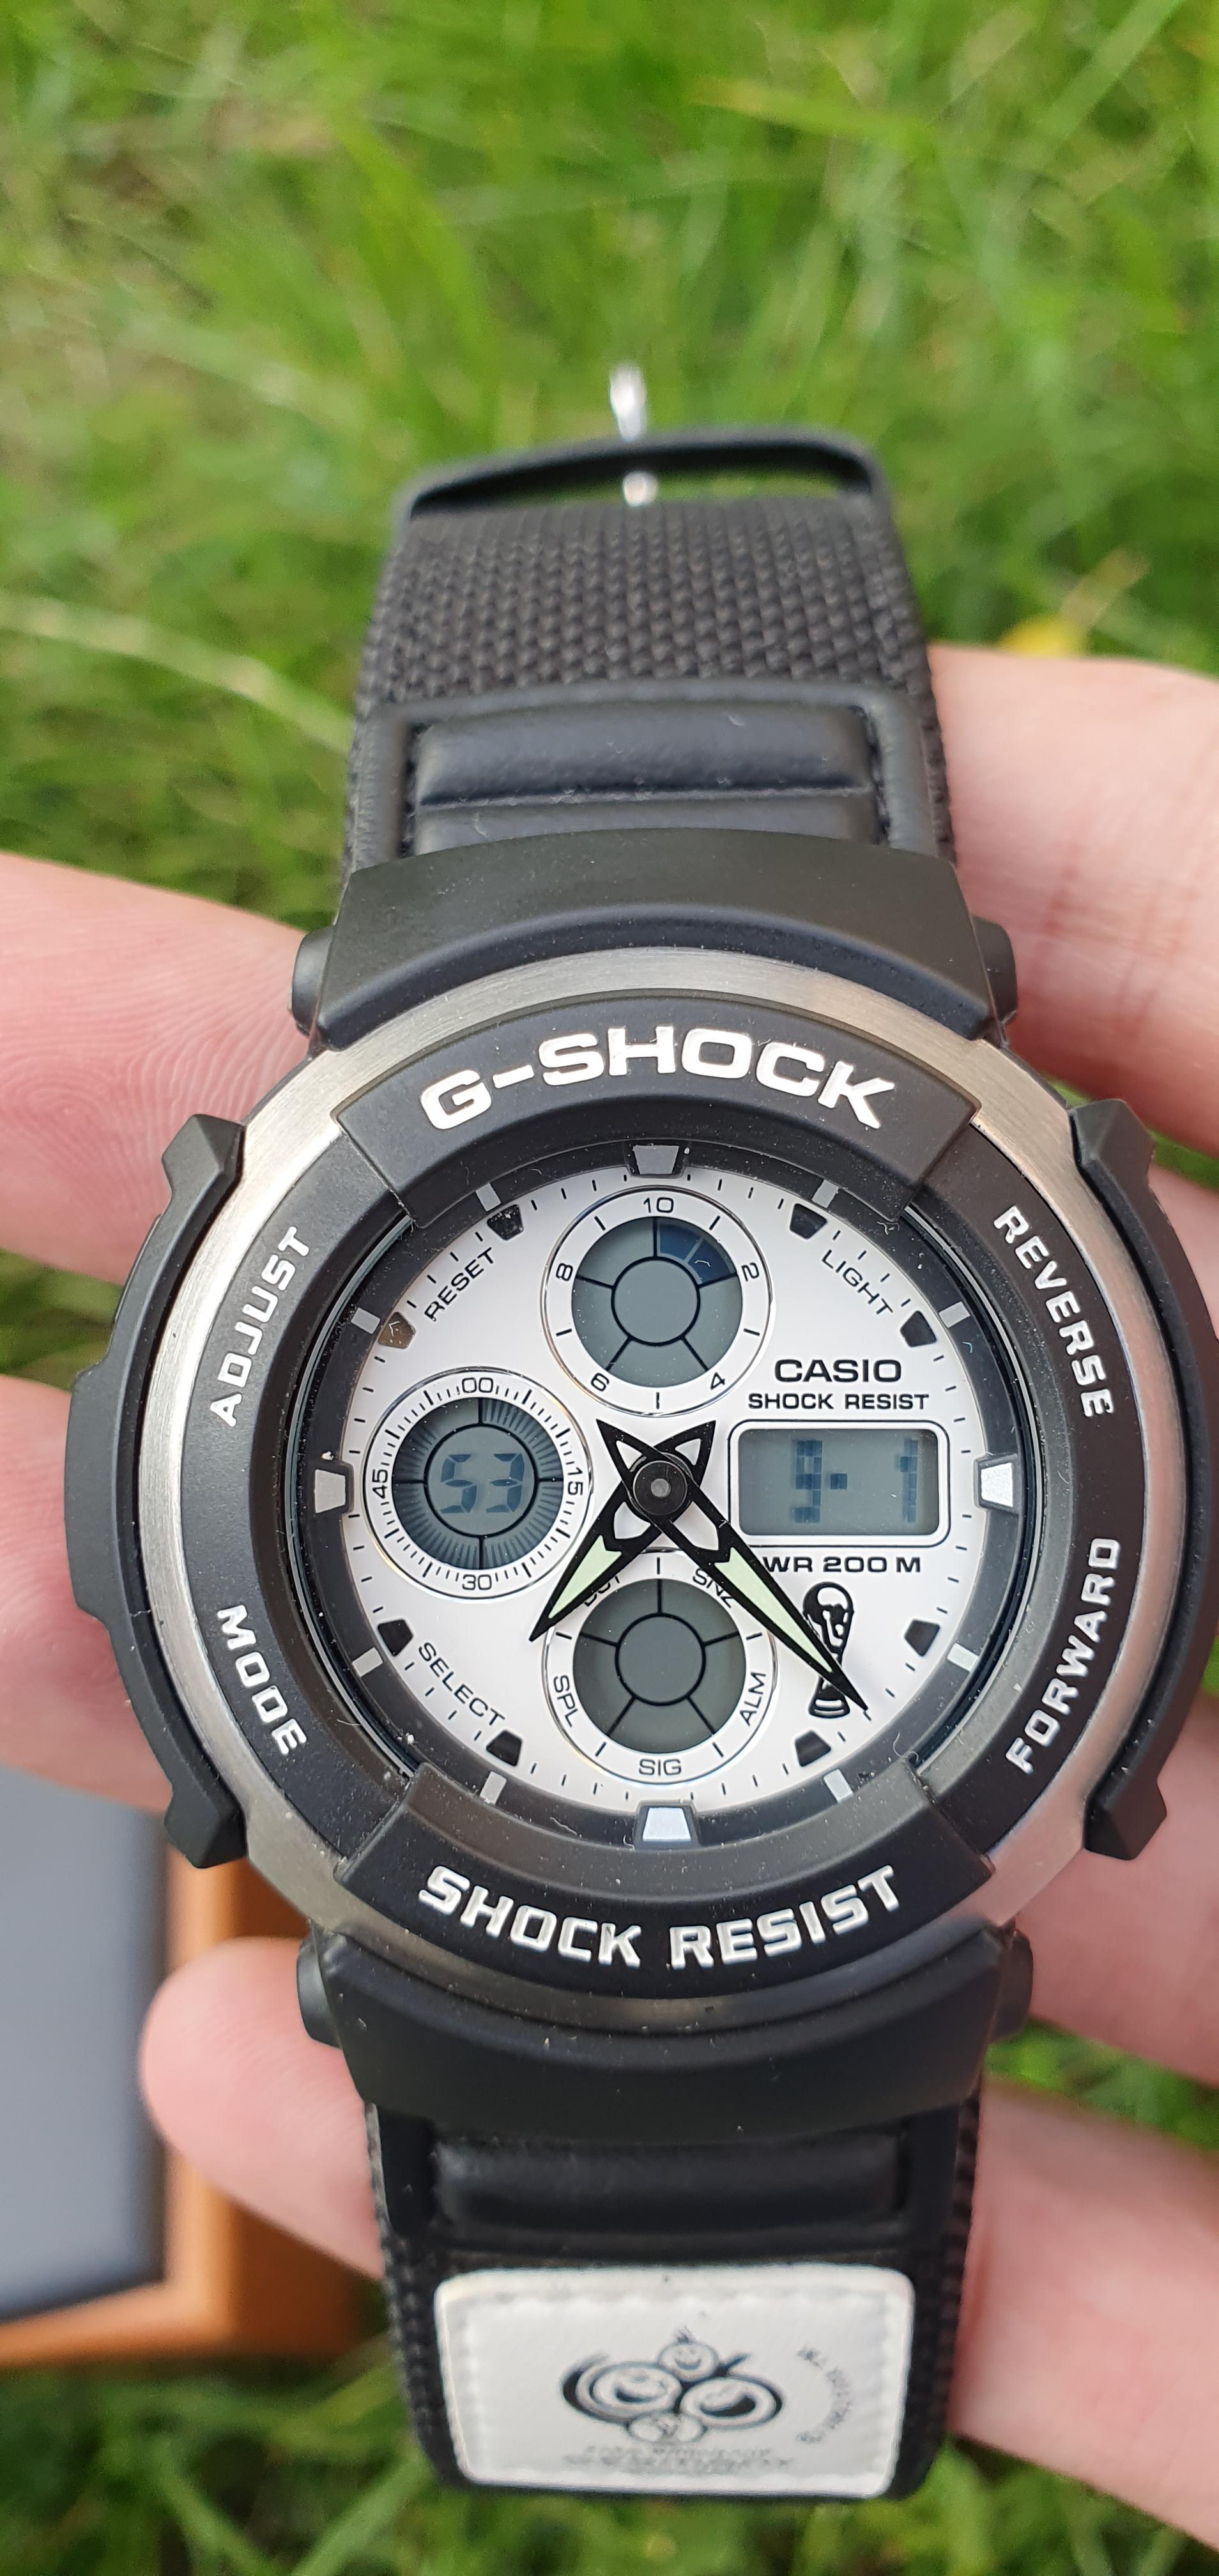 WTS] Limited Edition Casio G-Shock FIFA 2006 - Full Box - Like New